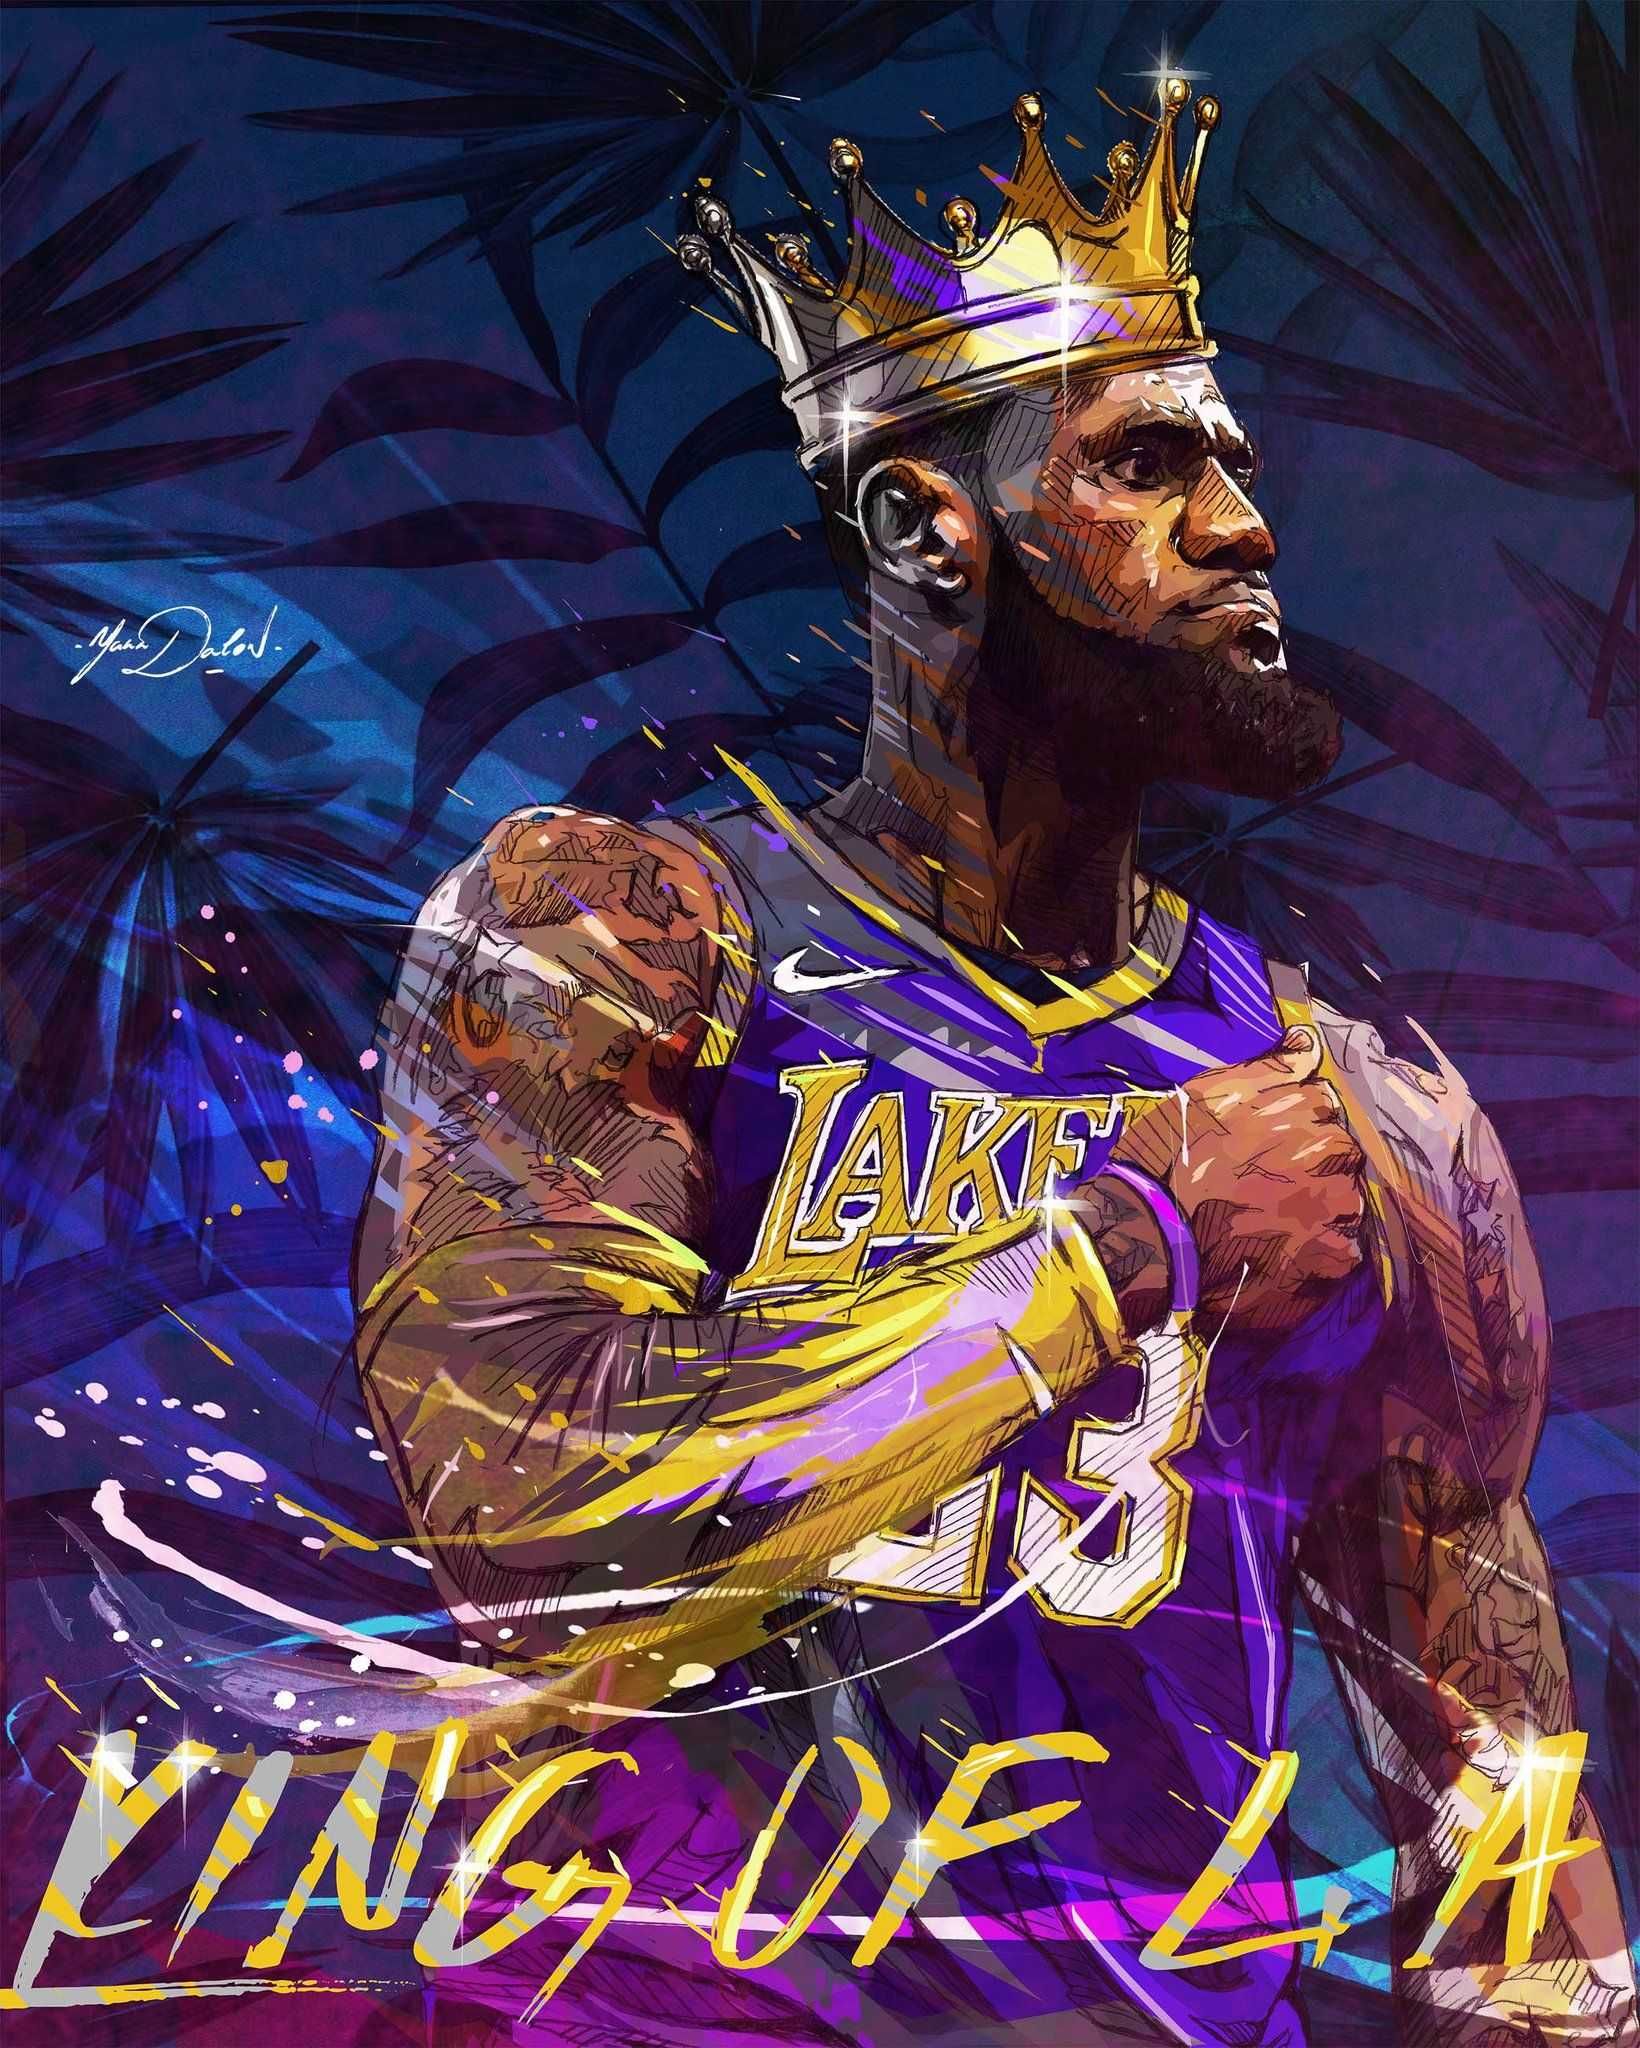 King of L.A. is a piece that celebrates the return of LeBron James to the Lakers. - Lebron James